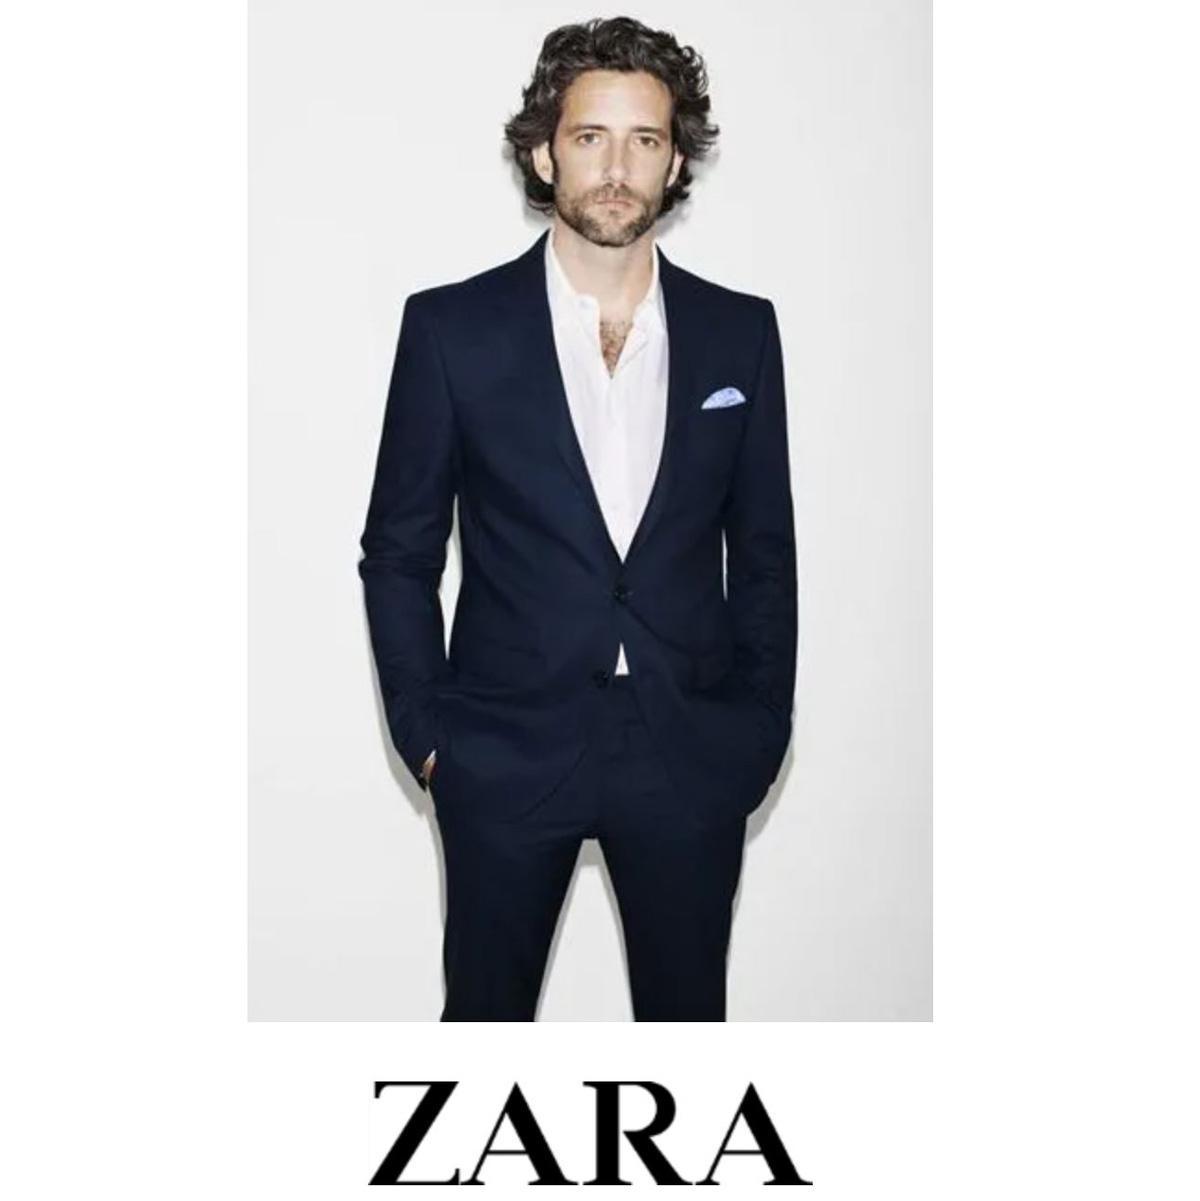 Zara Man Size Charts Sizeguide for Clothes, Accessories and Shoes